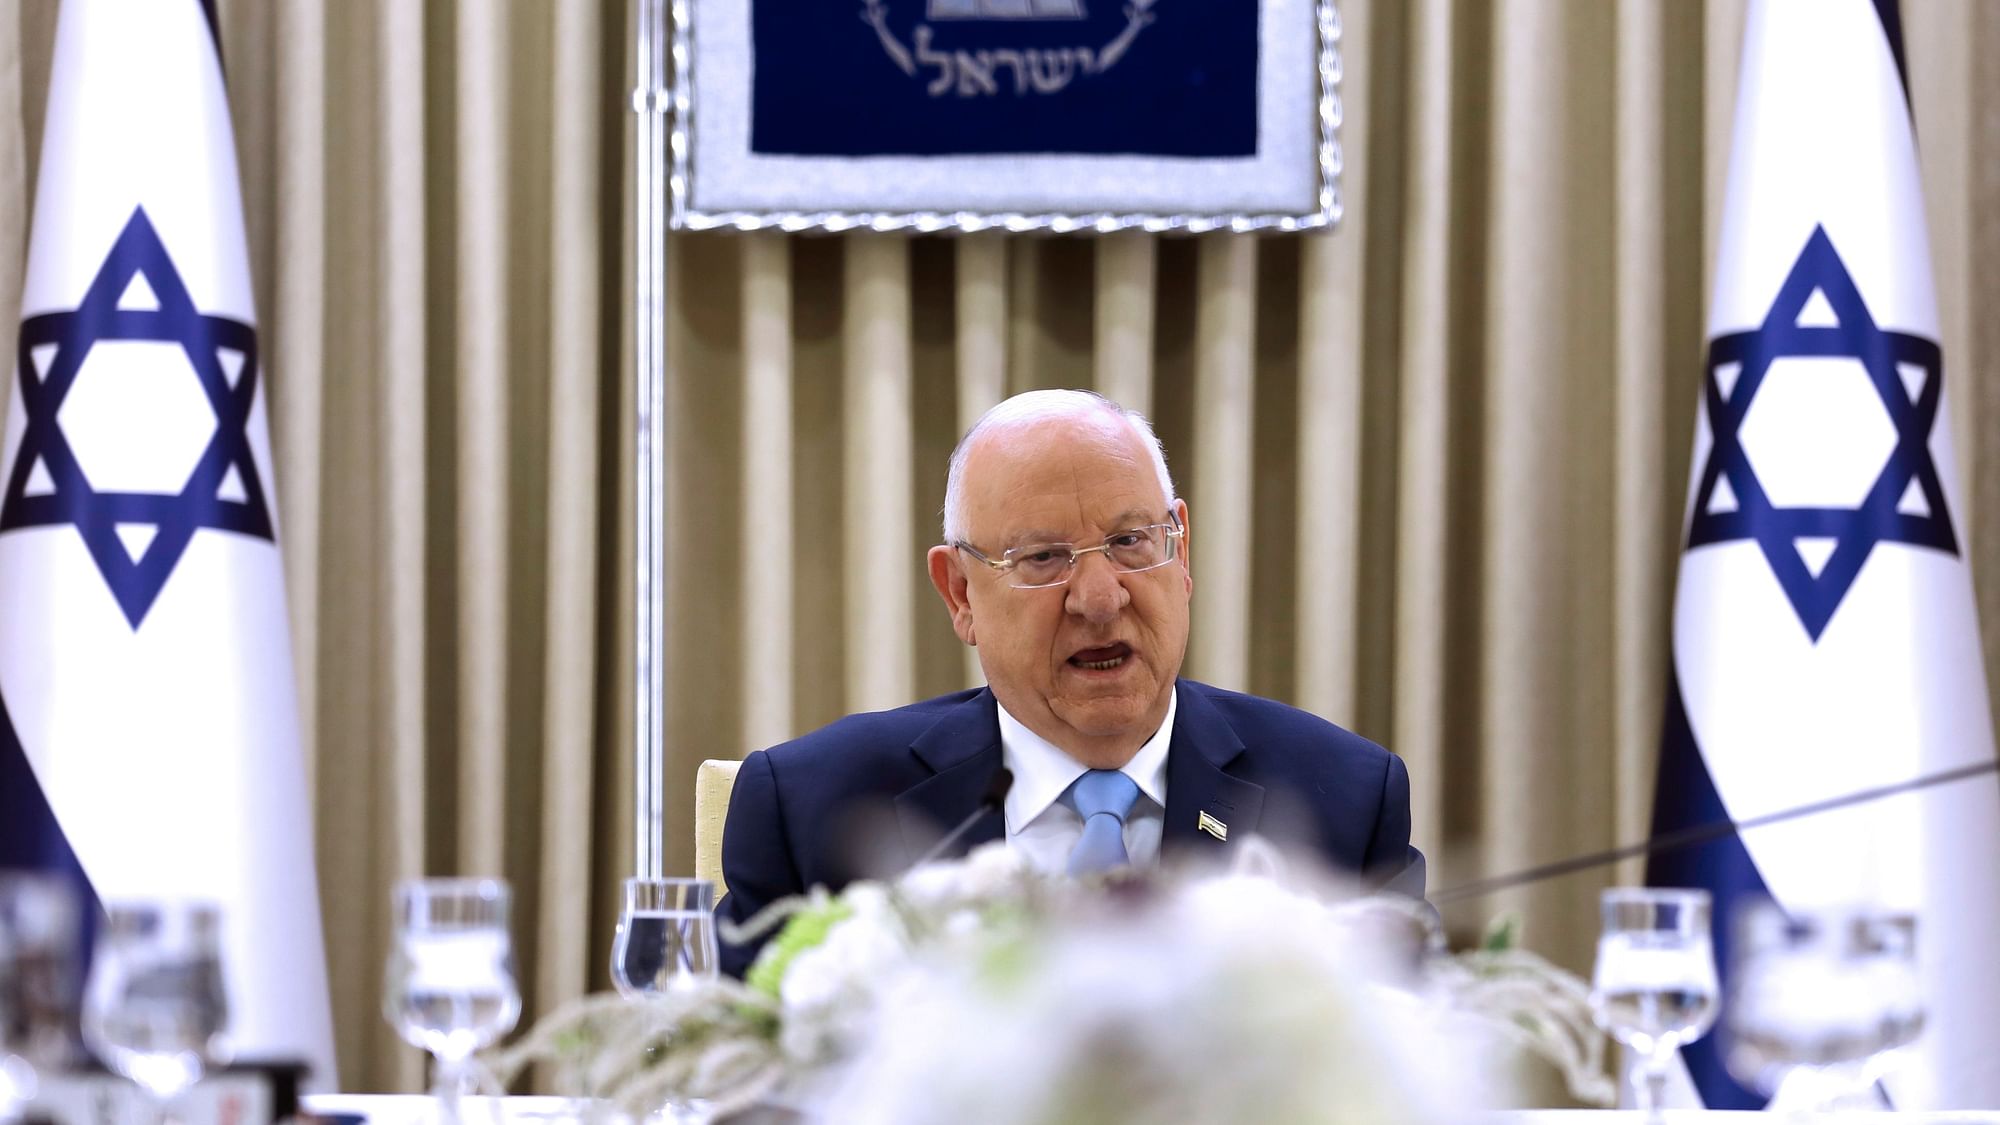 Israel President Reuven Rivlin during a consultation meeting with members of the Likud party, in Jerusalem.